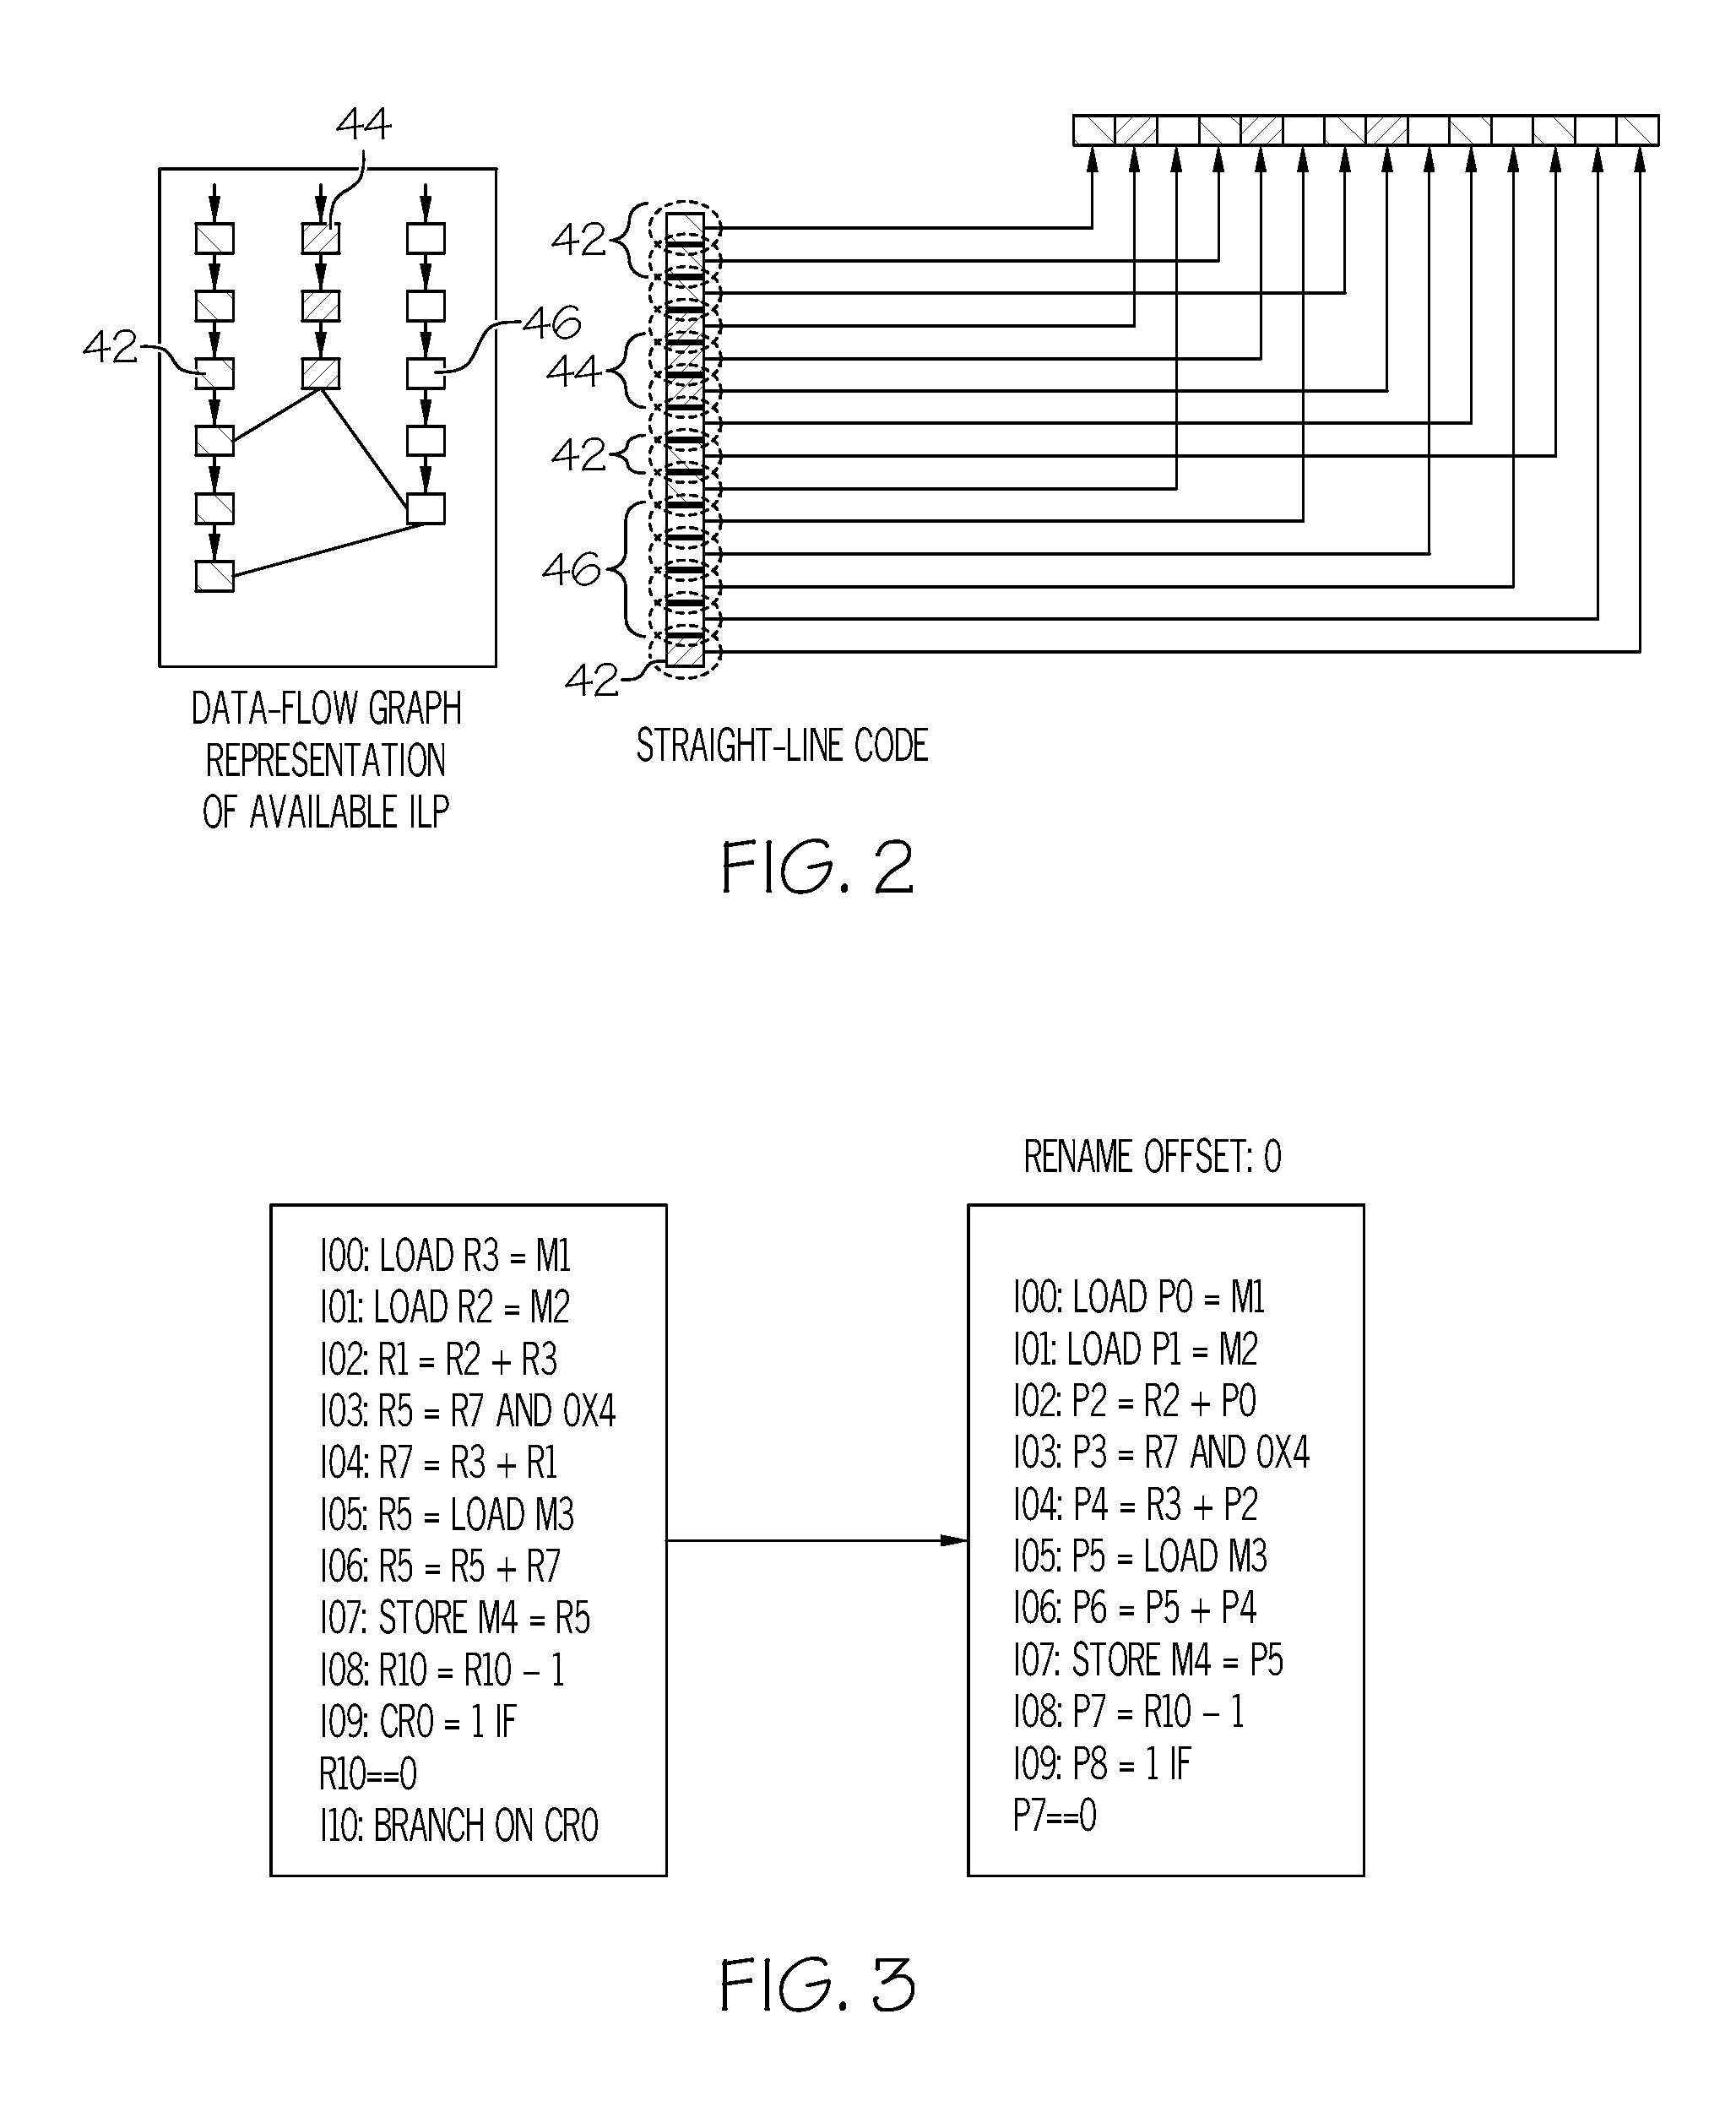 Computer processing system employing an instruction schedule cache